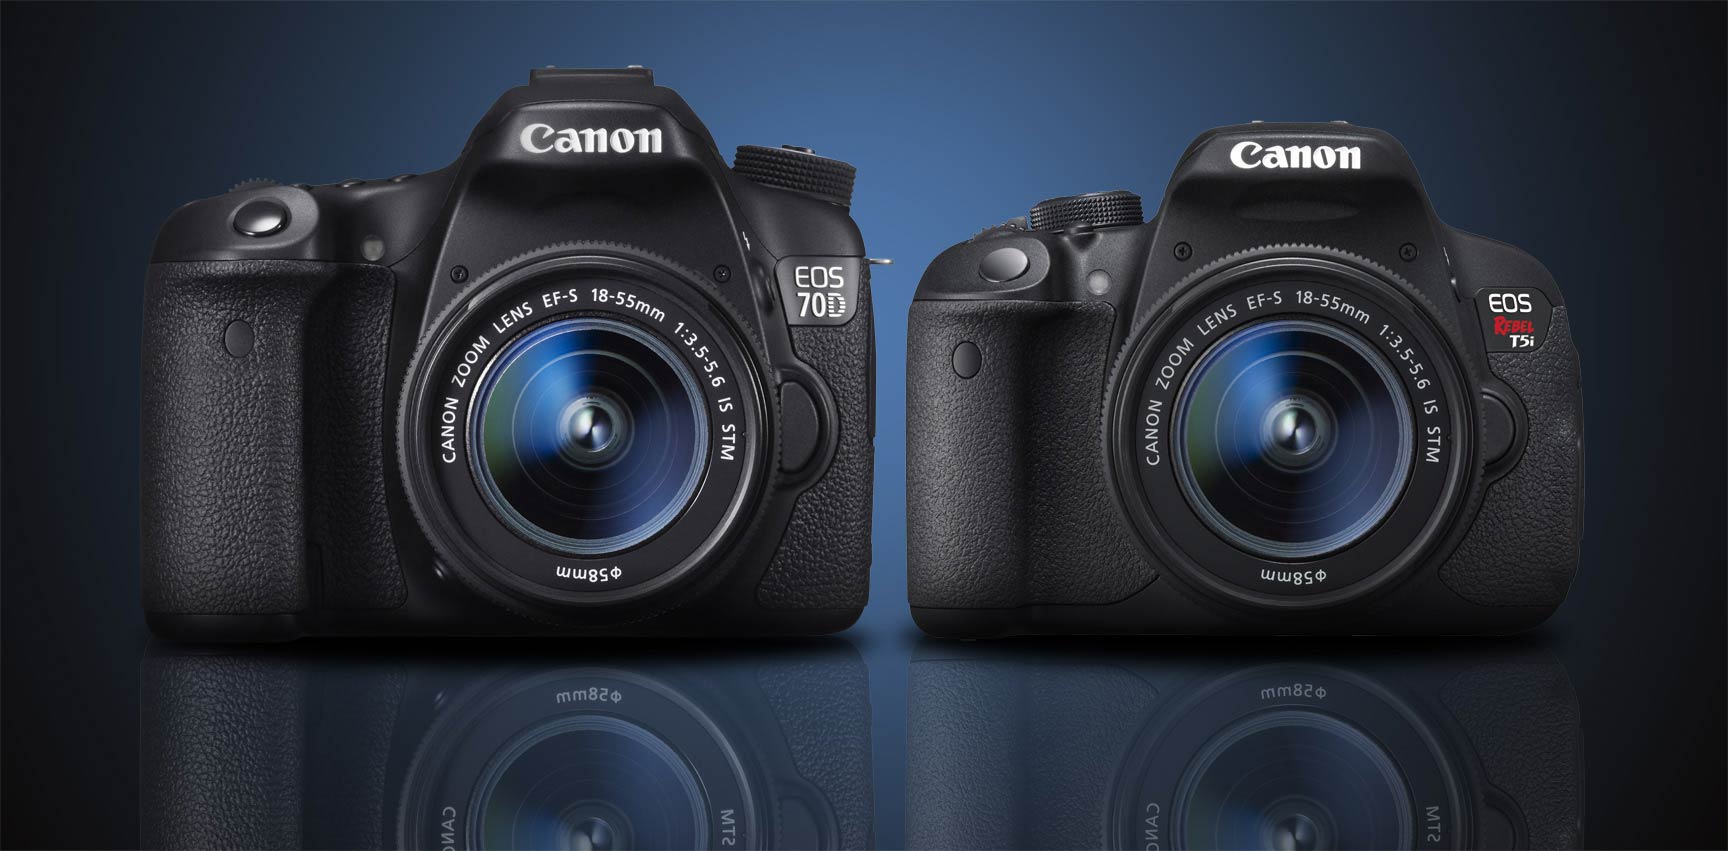 Canon 70D vs T5i : Which Should You Buy? - Light And Matter